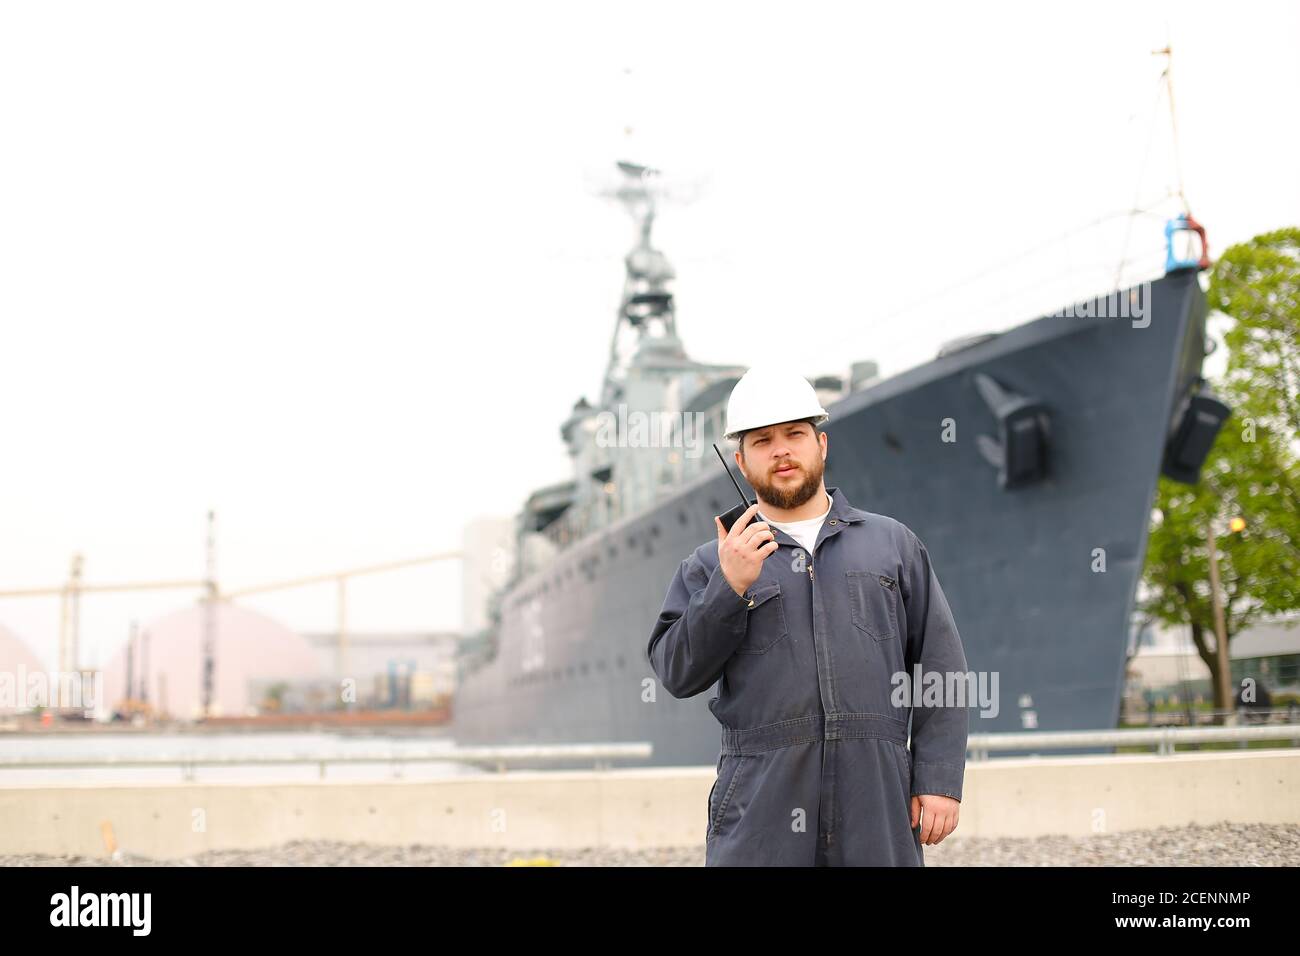 Marine deck officer talking by walkie talkie radio and standing near offshore vessel in bakground. Stock Photo